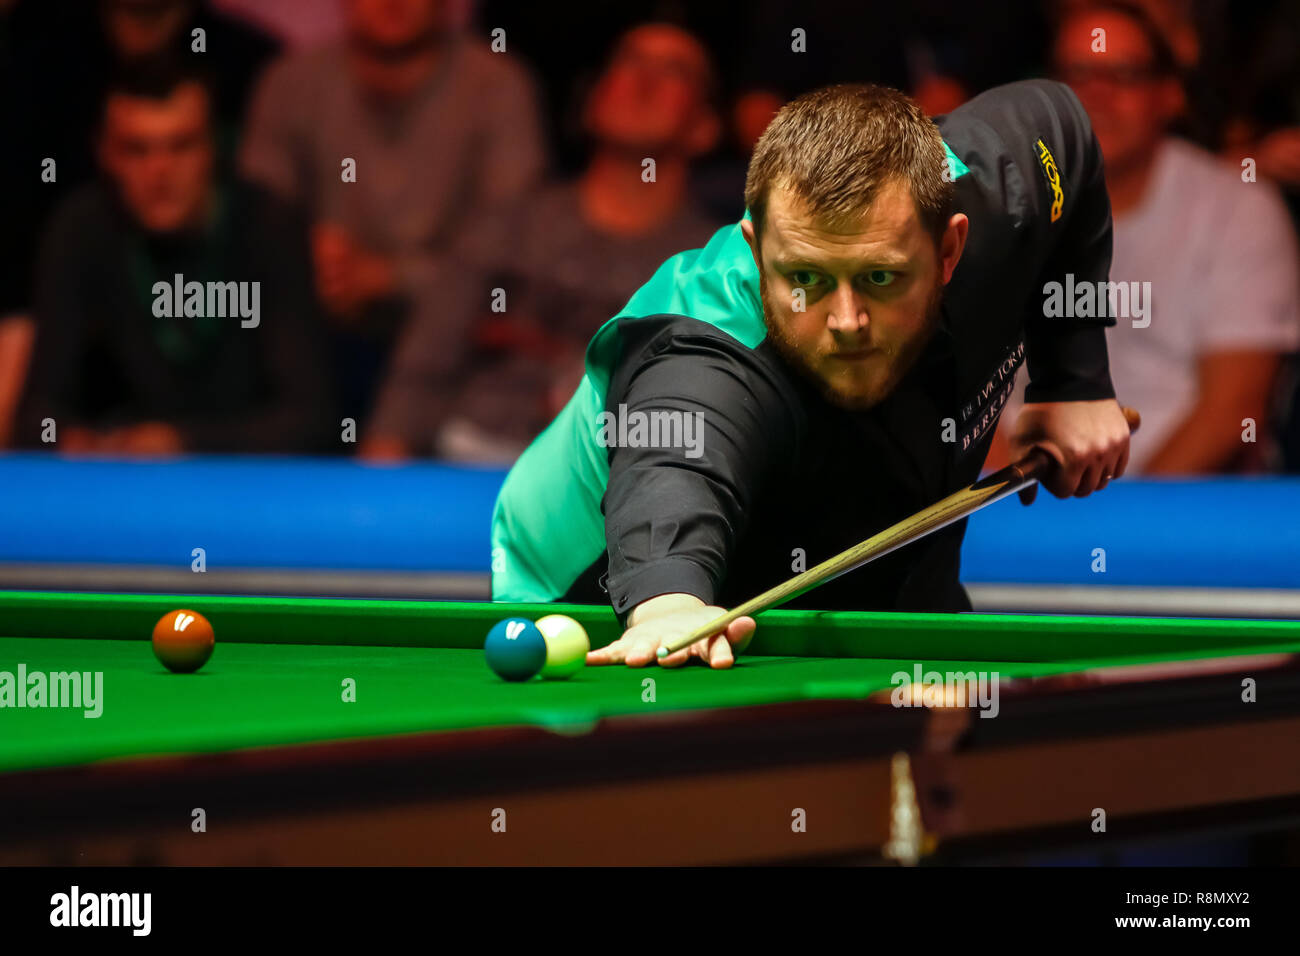 Glasgow, UK. 16th Dec 2018. Betvictor Home Nations Series Scottish Open Final between Shaun Murphy (NIR) Vs Mark Allen (ENG). Action from the evening session with Mark Allen Stating the Session 5-3 ahead (Best of 17) Credit: Colin Poultney/Alamy Live News Stock Photo